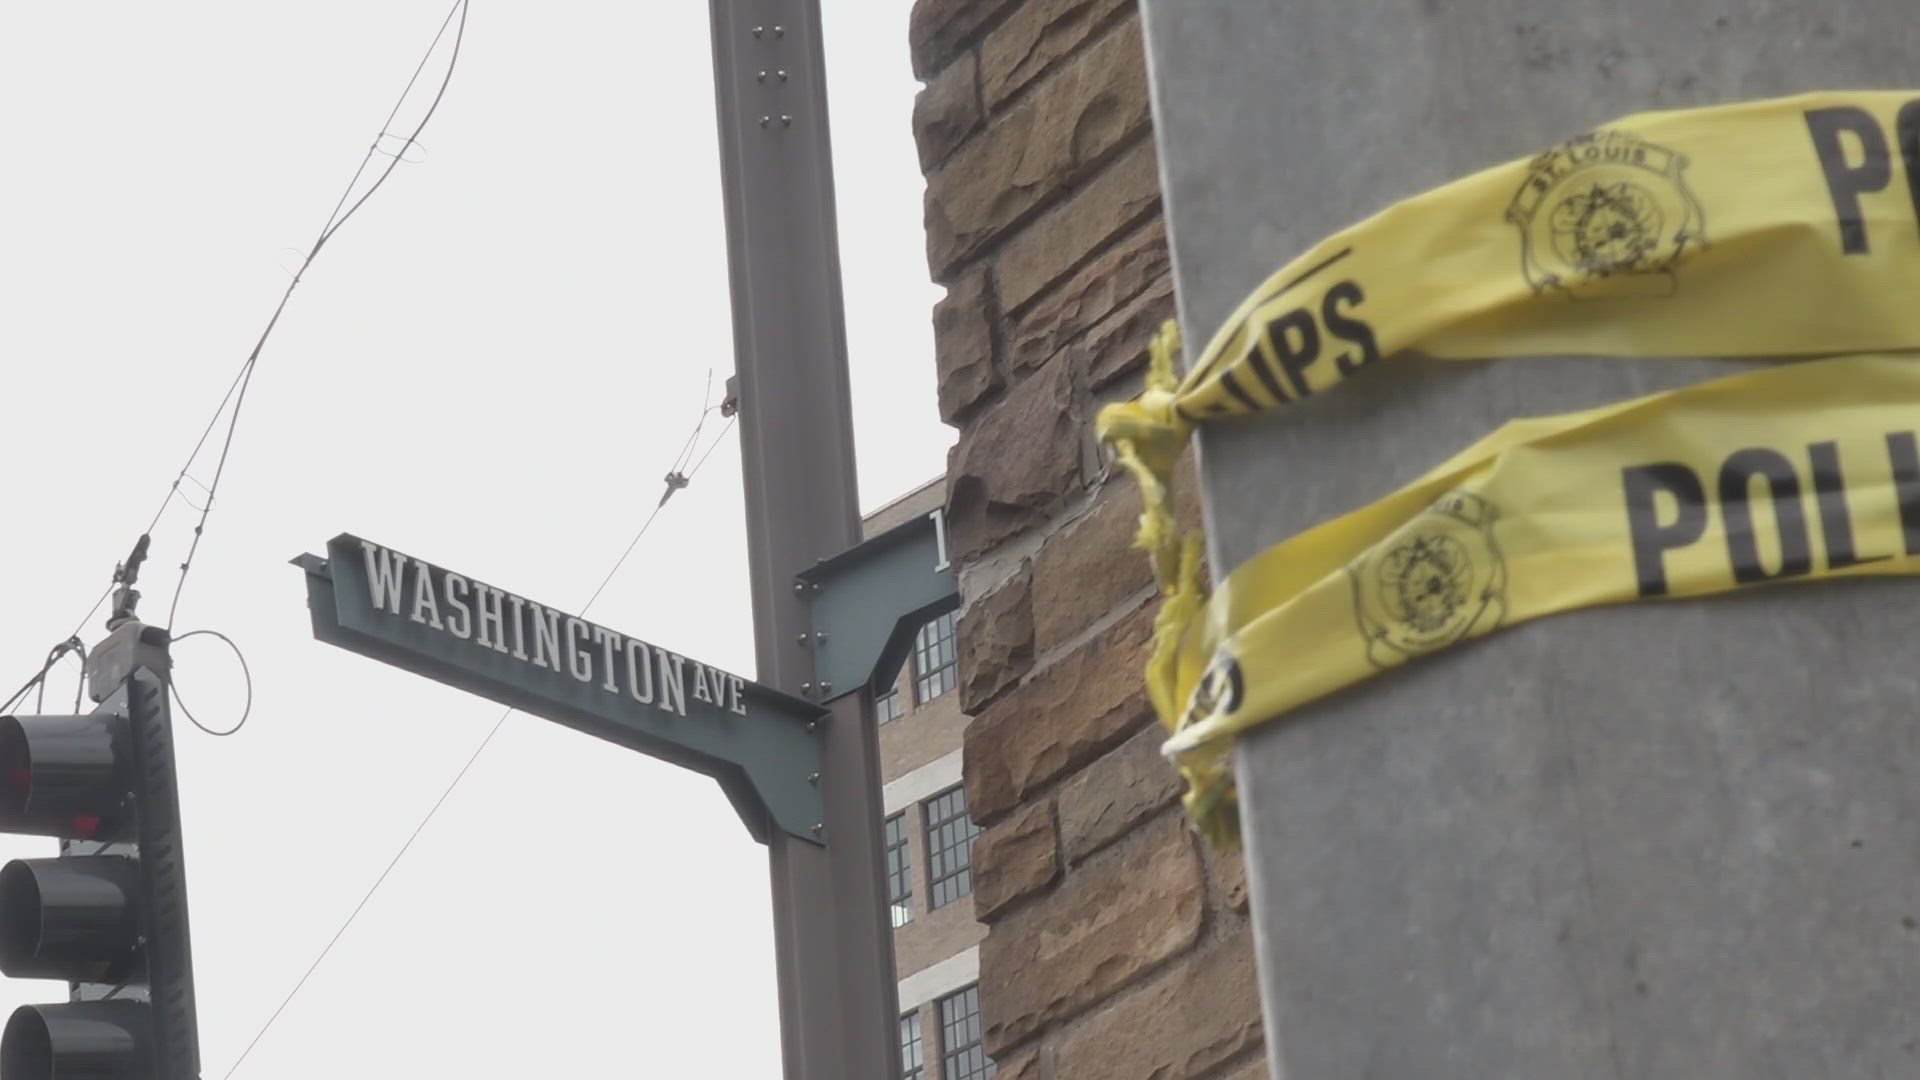 Community leaders are looking for solutions following a deadly shooting in downtown St. Louis. The shooting killed 1 teen and left 11 others injured.